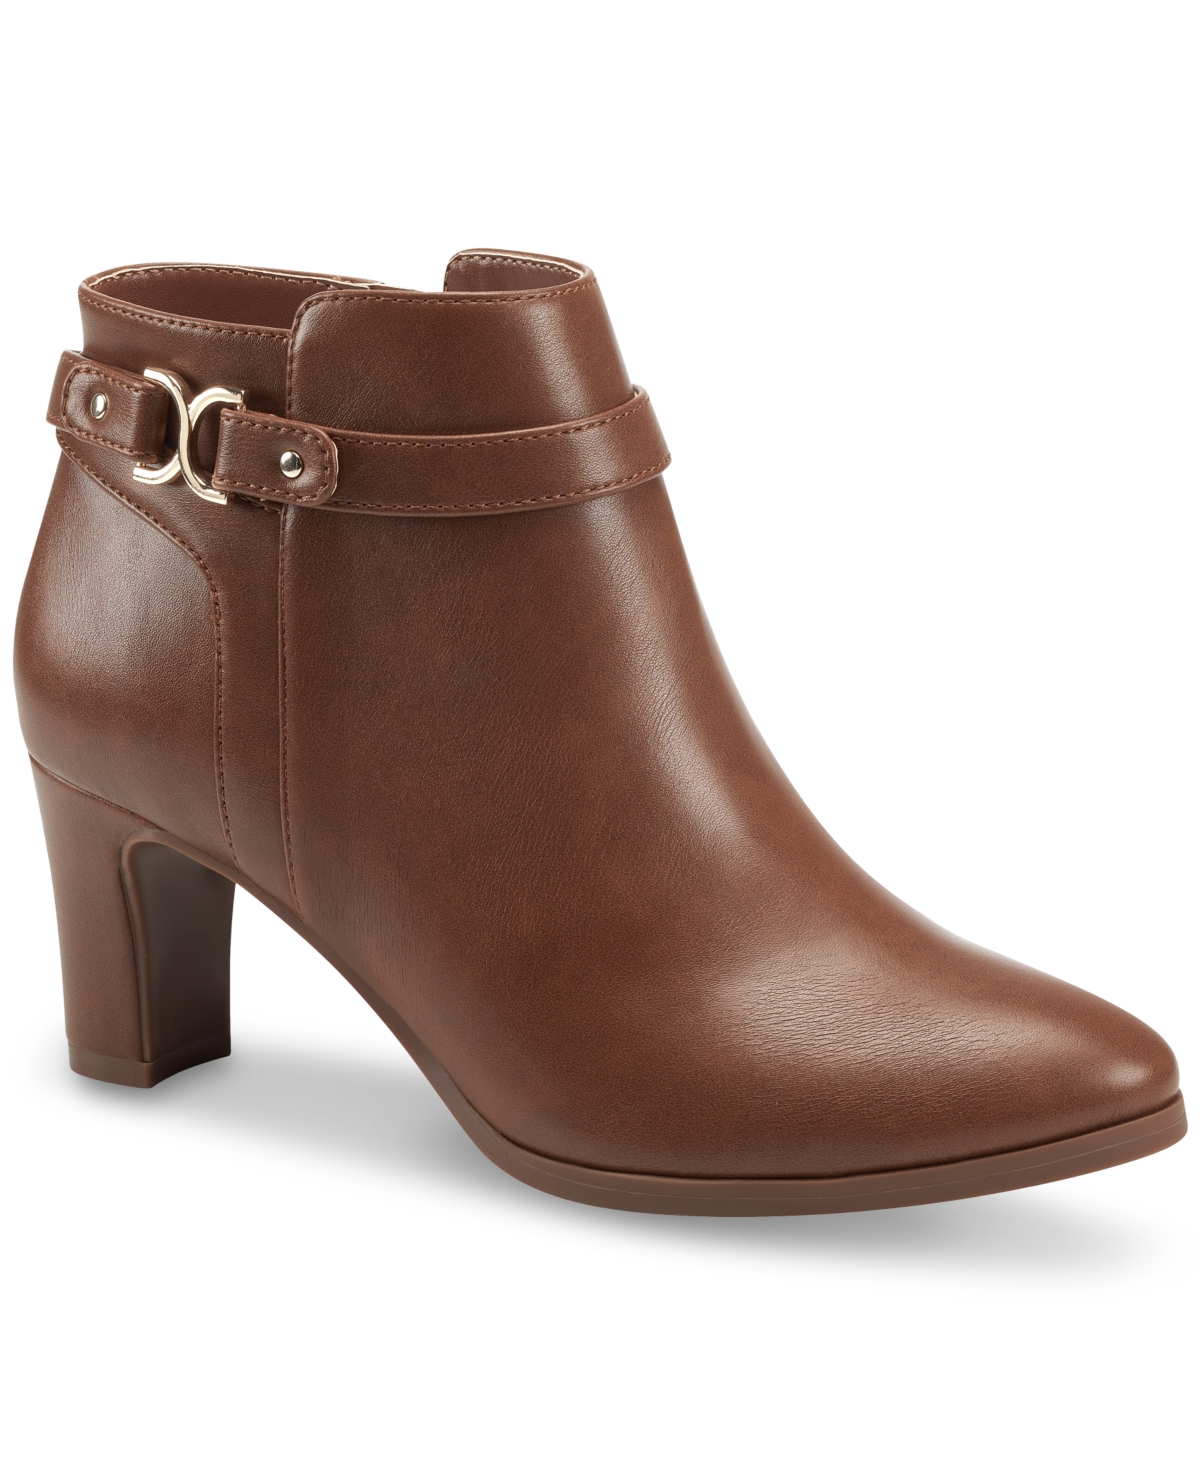 Women's Pixxy Dress Booties, Created for Macy's - Saddle